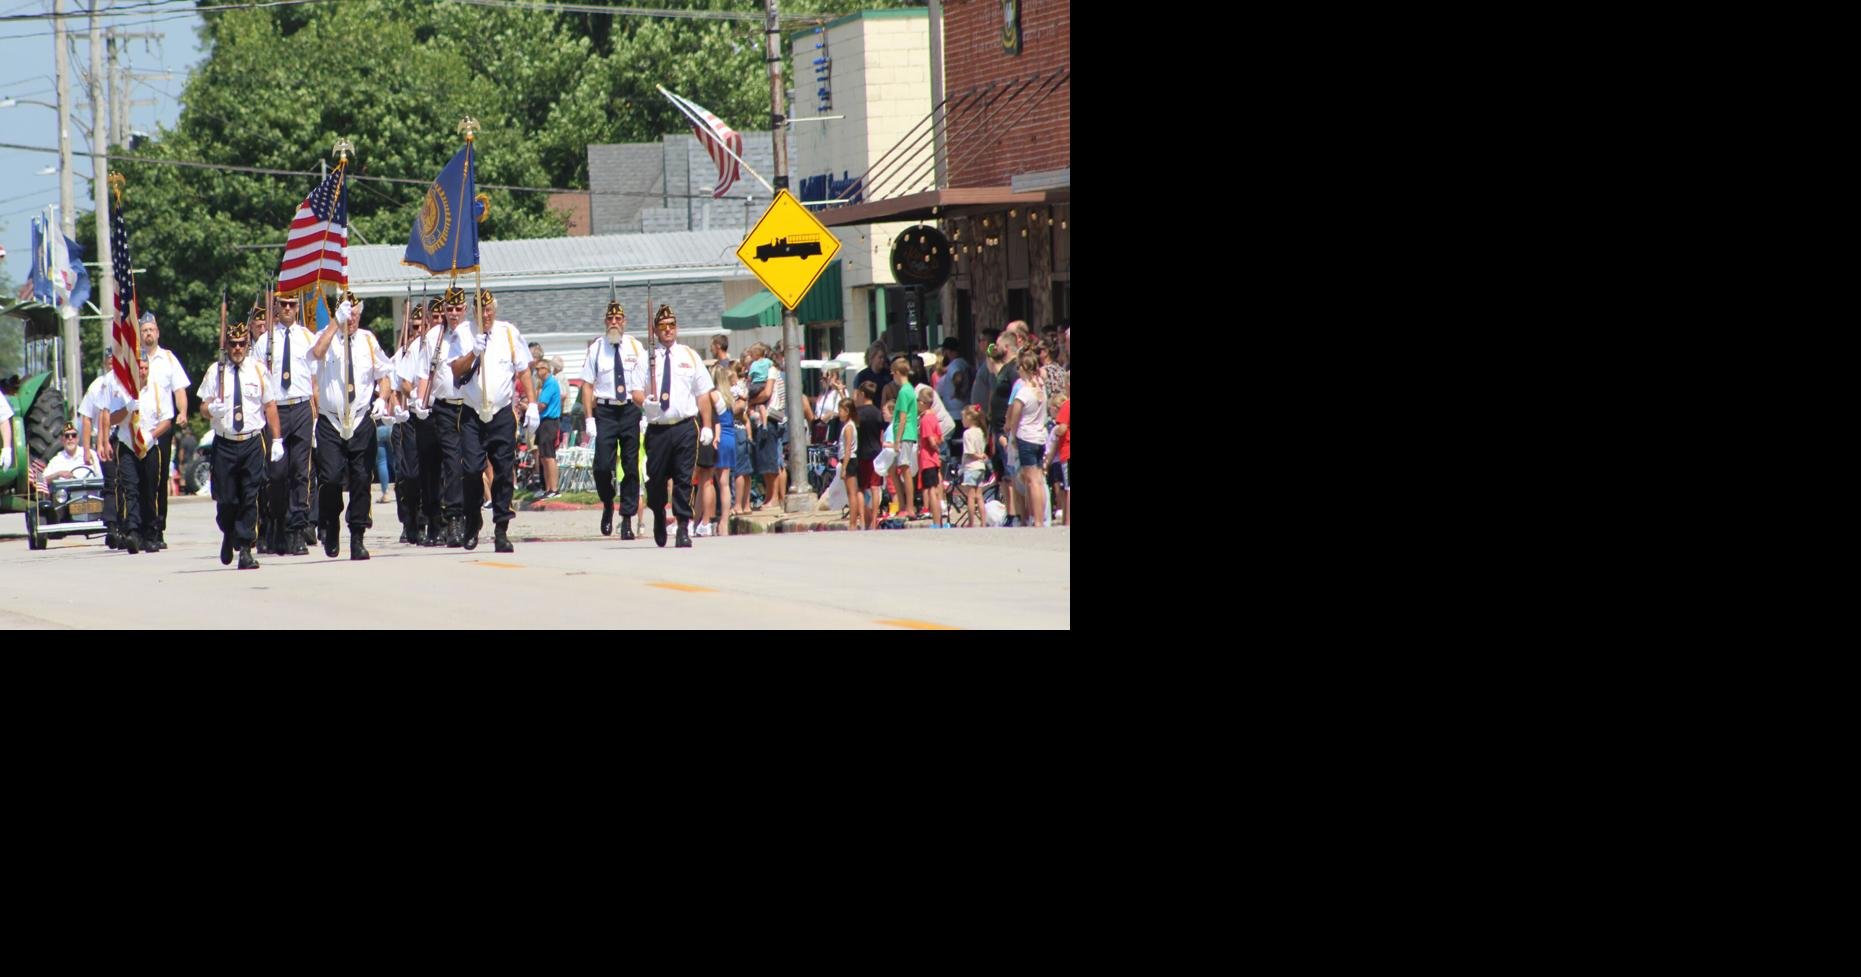 Area residents turn out for annual Old Settlers Parade newsbug.info